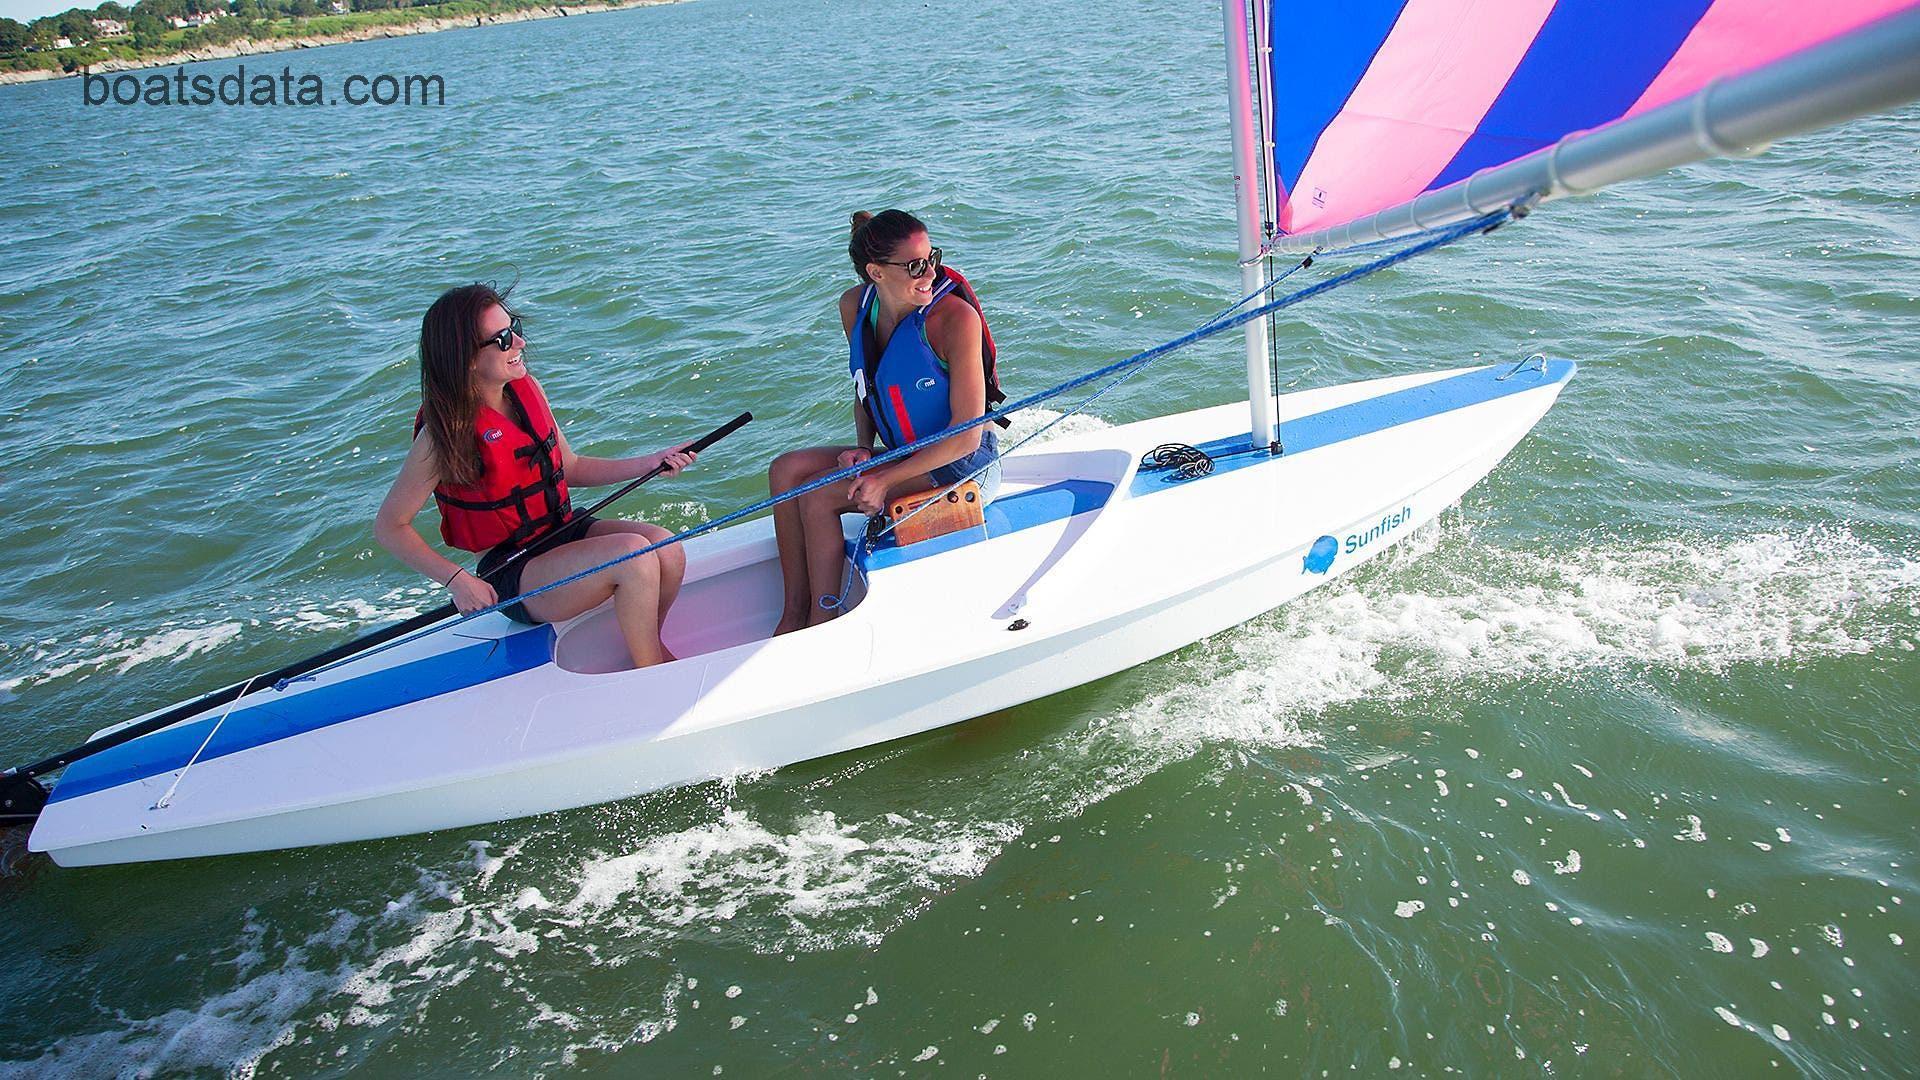 Laser Boats Sunfish tv detailed specifications and features